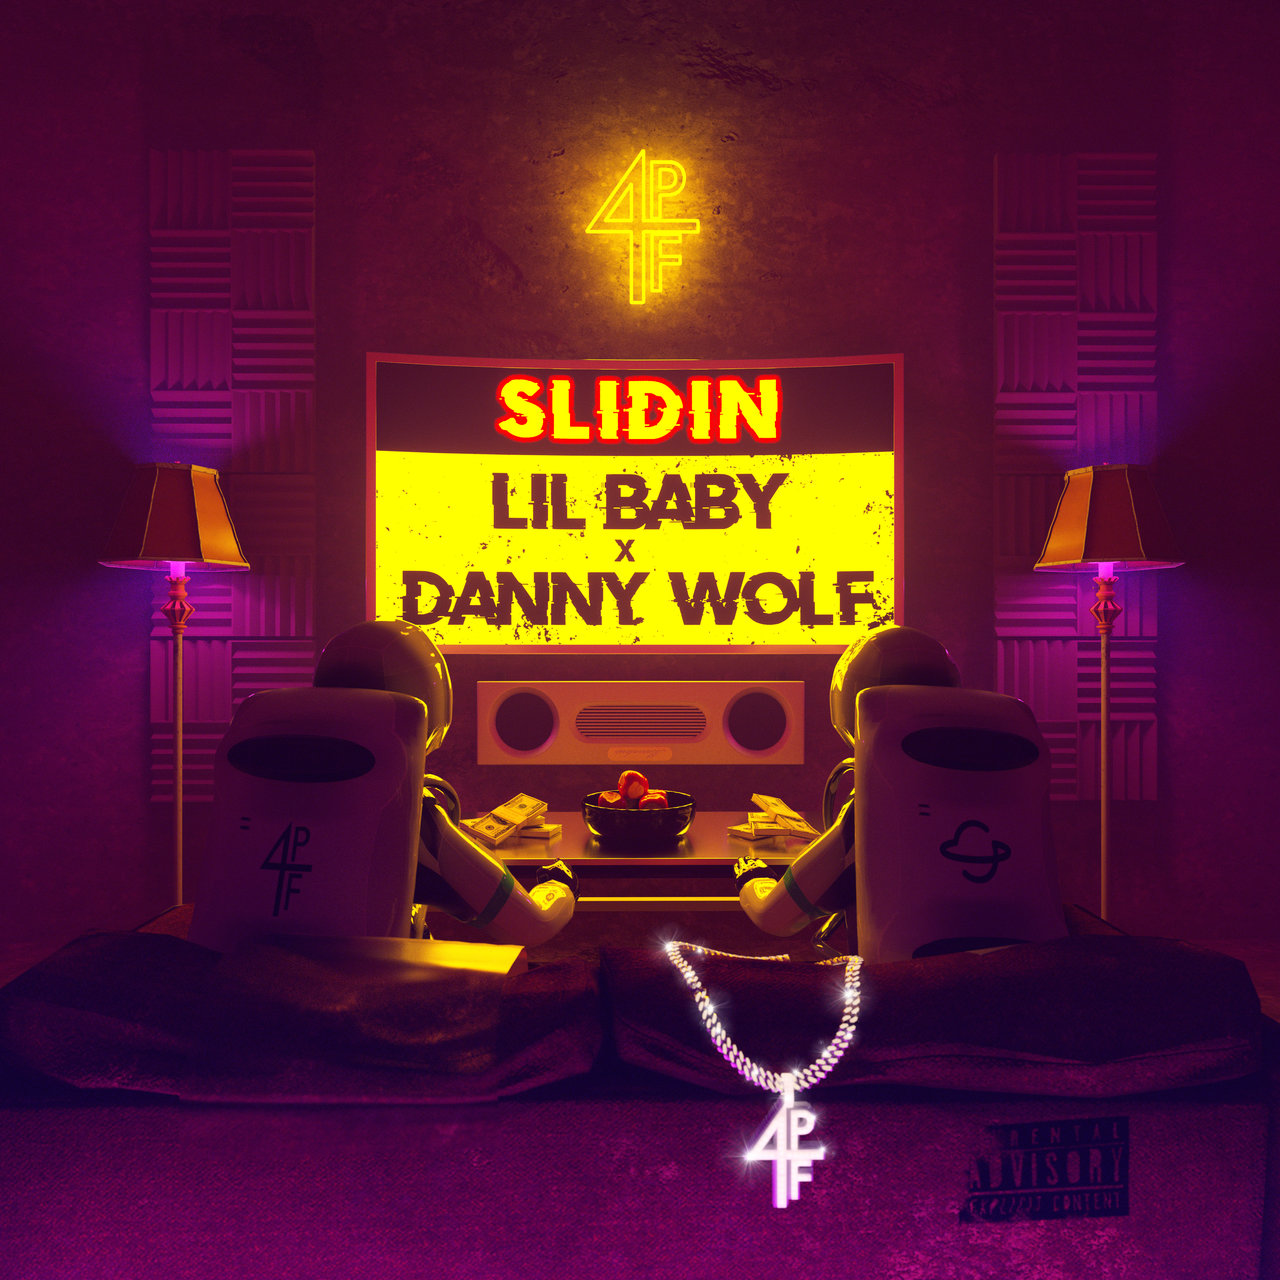 Lil Baby and Danny Wolf - Slidin (Cover)